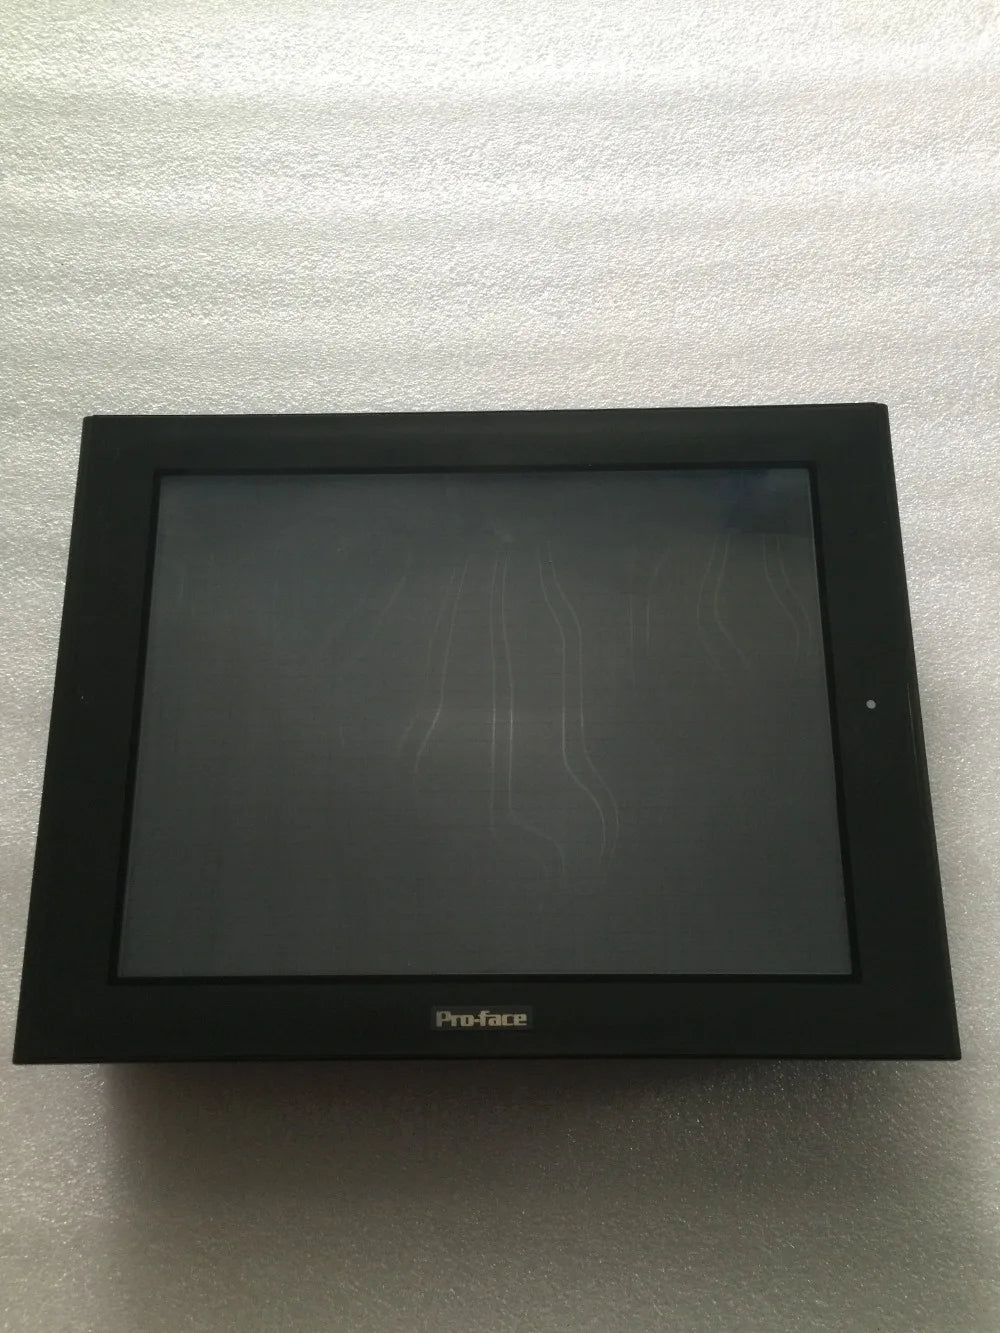 Proface GP2600-TC41-24V Touch Screen tested OK